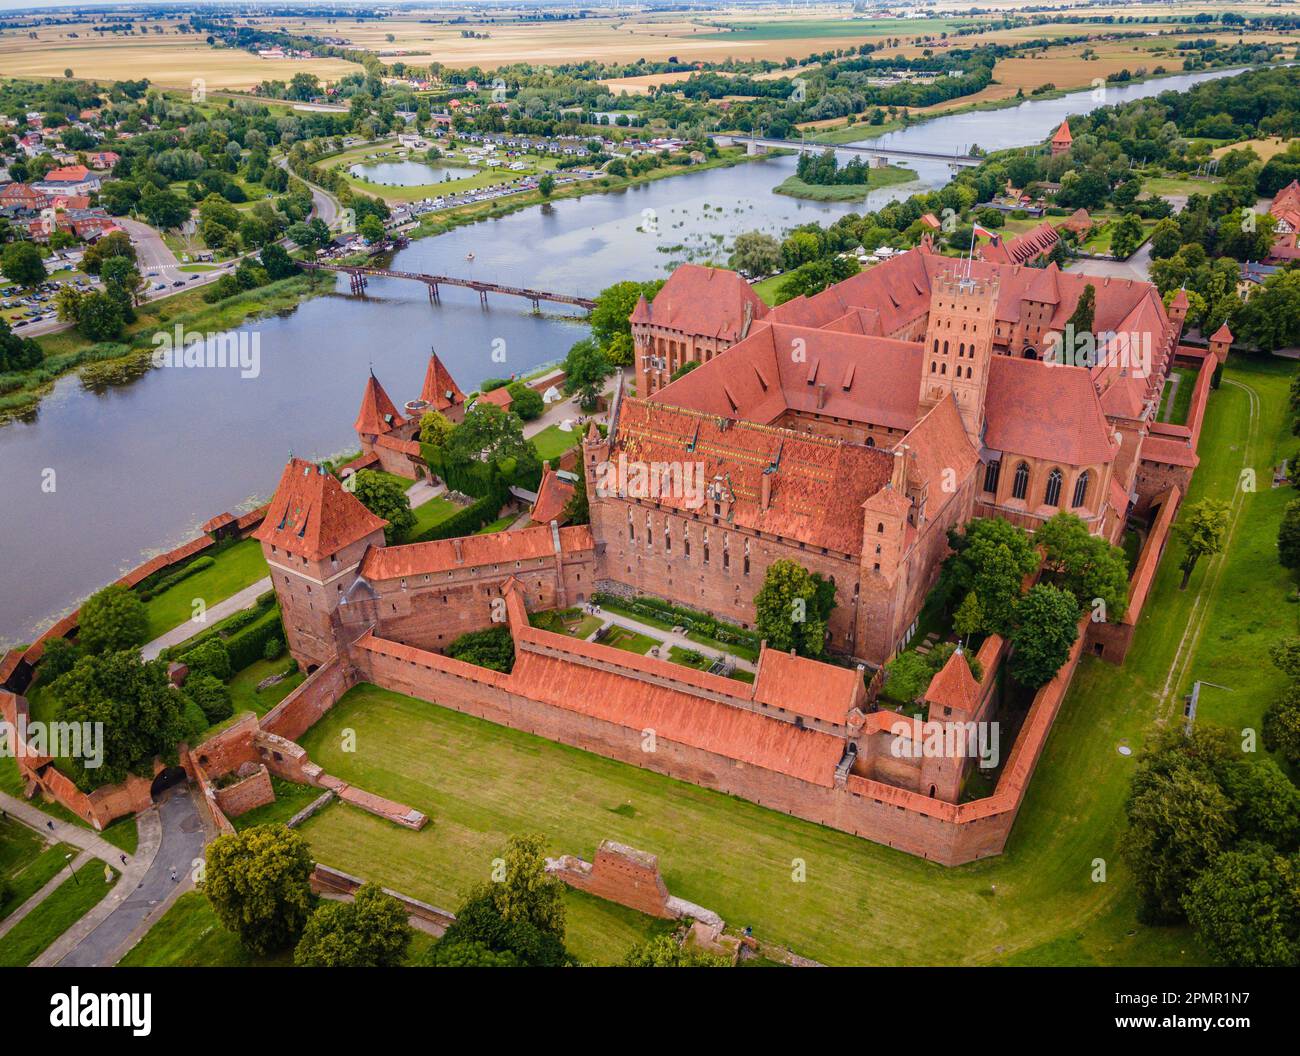 Aerial view of Malbork Teutonic order castle in Poland. It is the largest castle in the world measured by land area and a UNESCO World Heritage Site Stock Photo